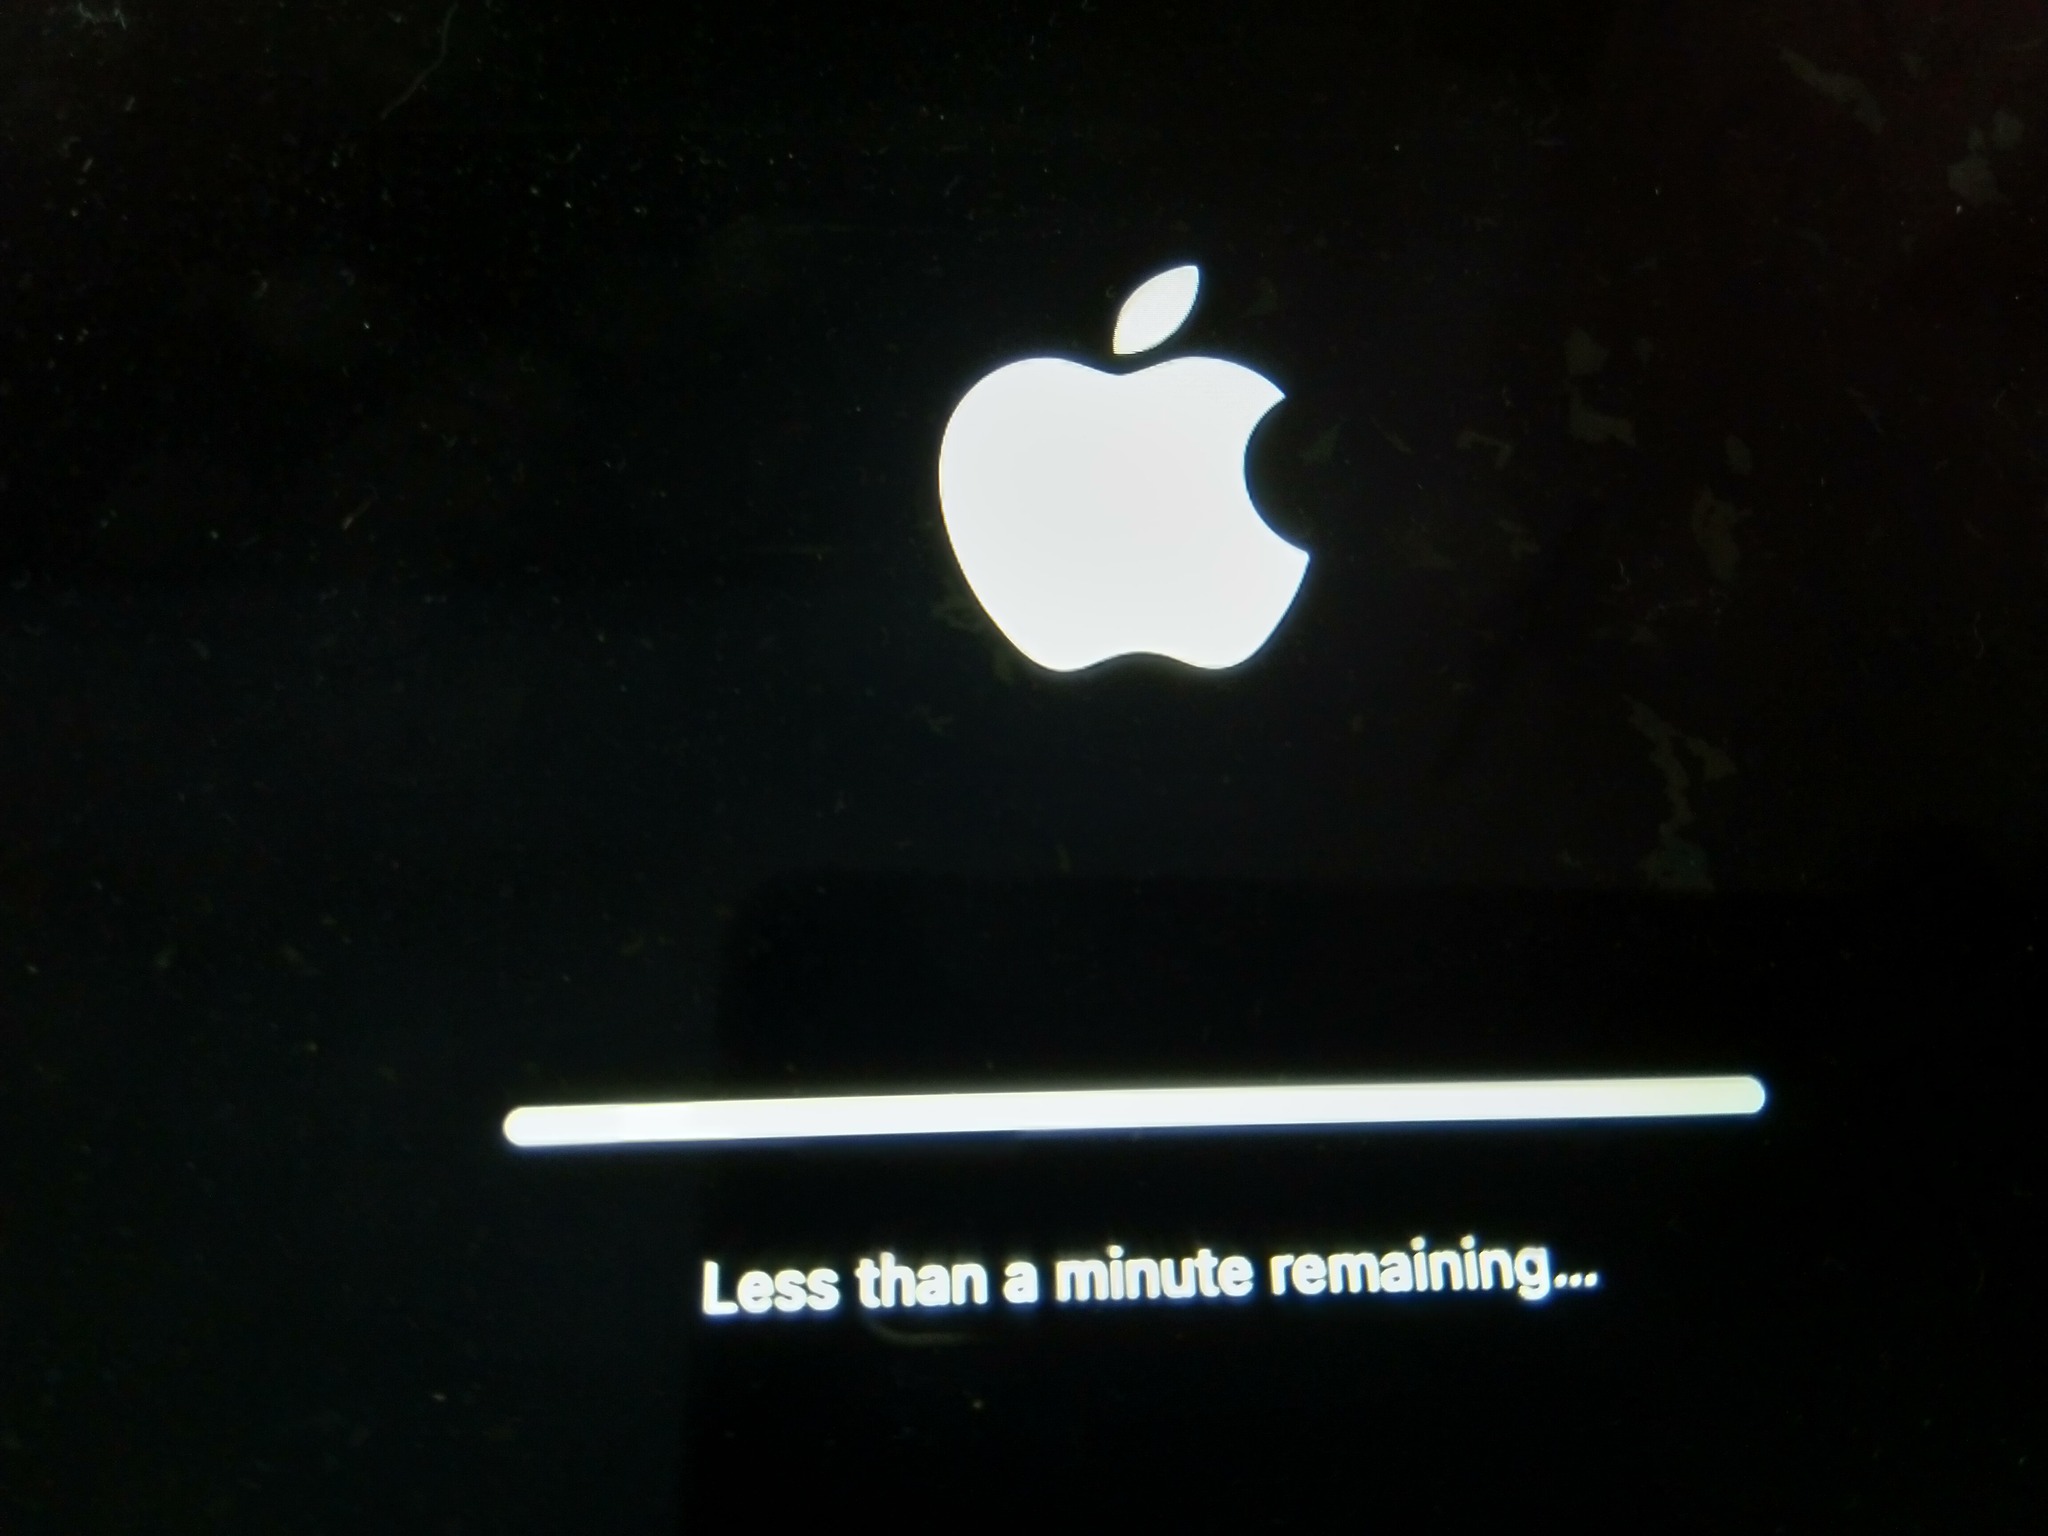 Less than a minute remaining